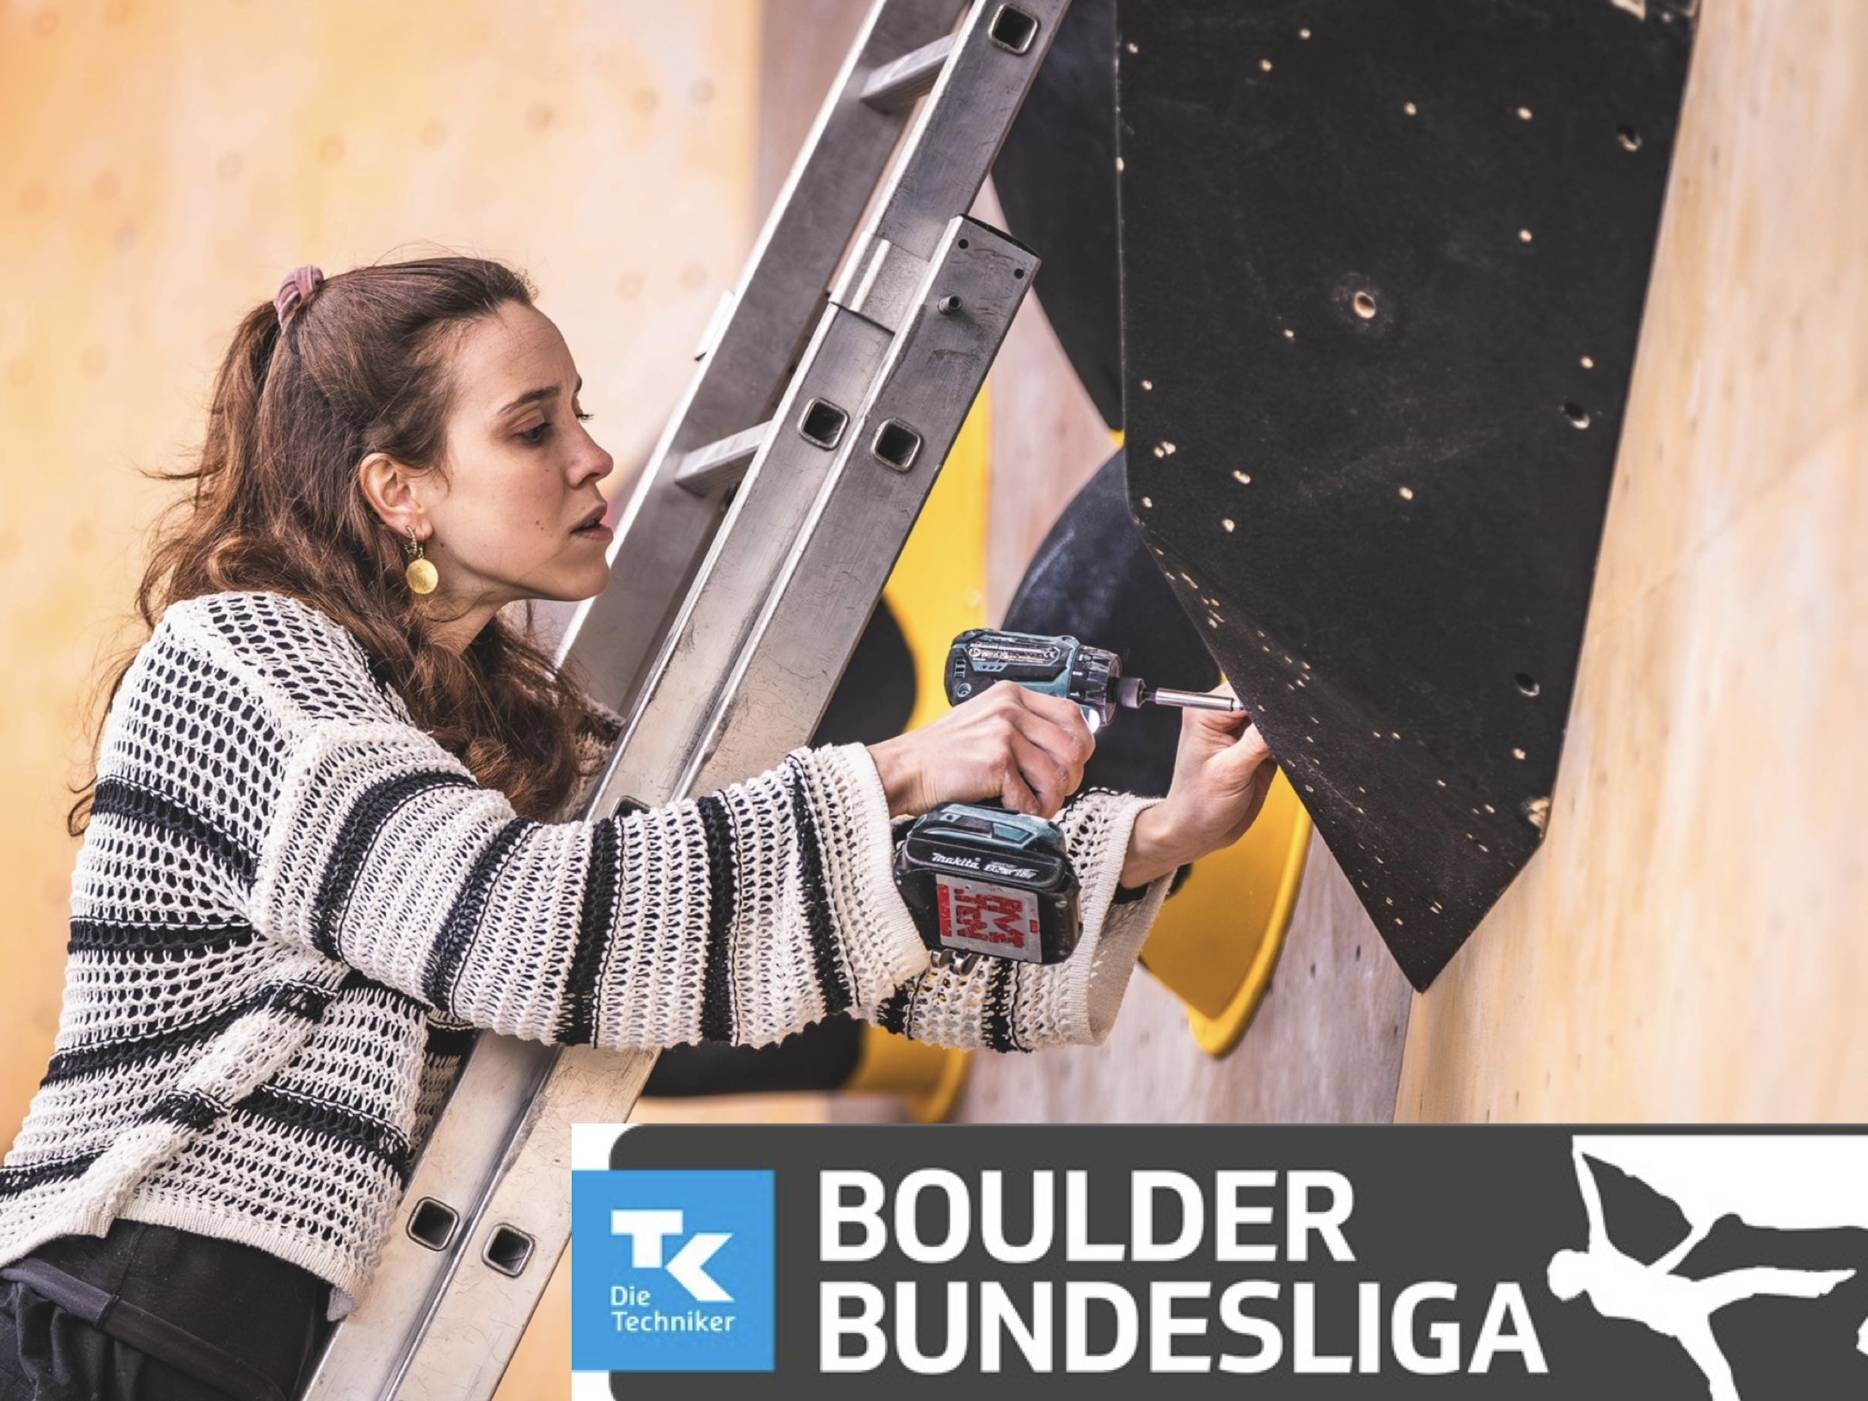 This is a league update for all people interested in the Boulder Bundesliga in boulder gym Steil in Karlsruhe